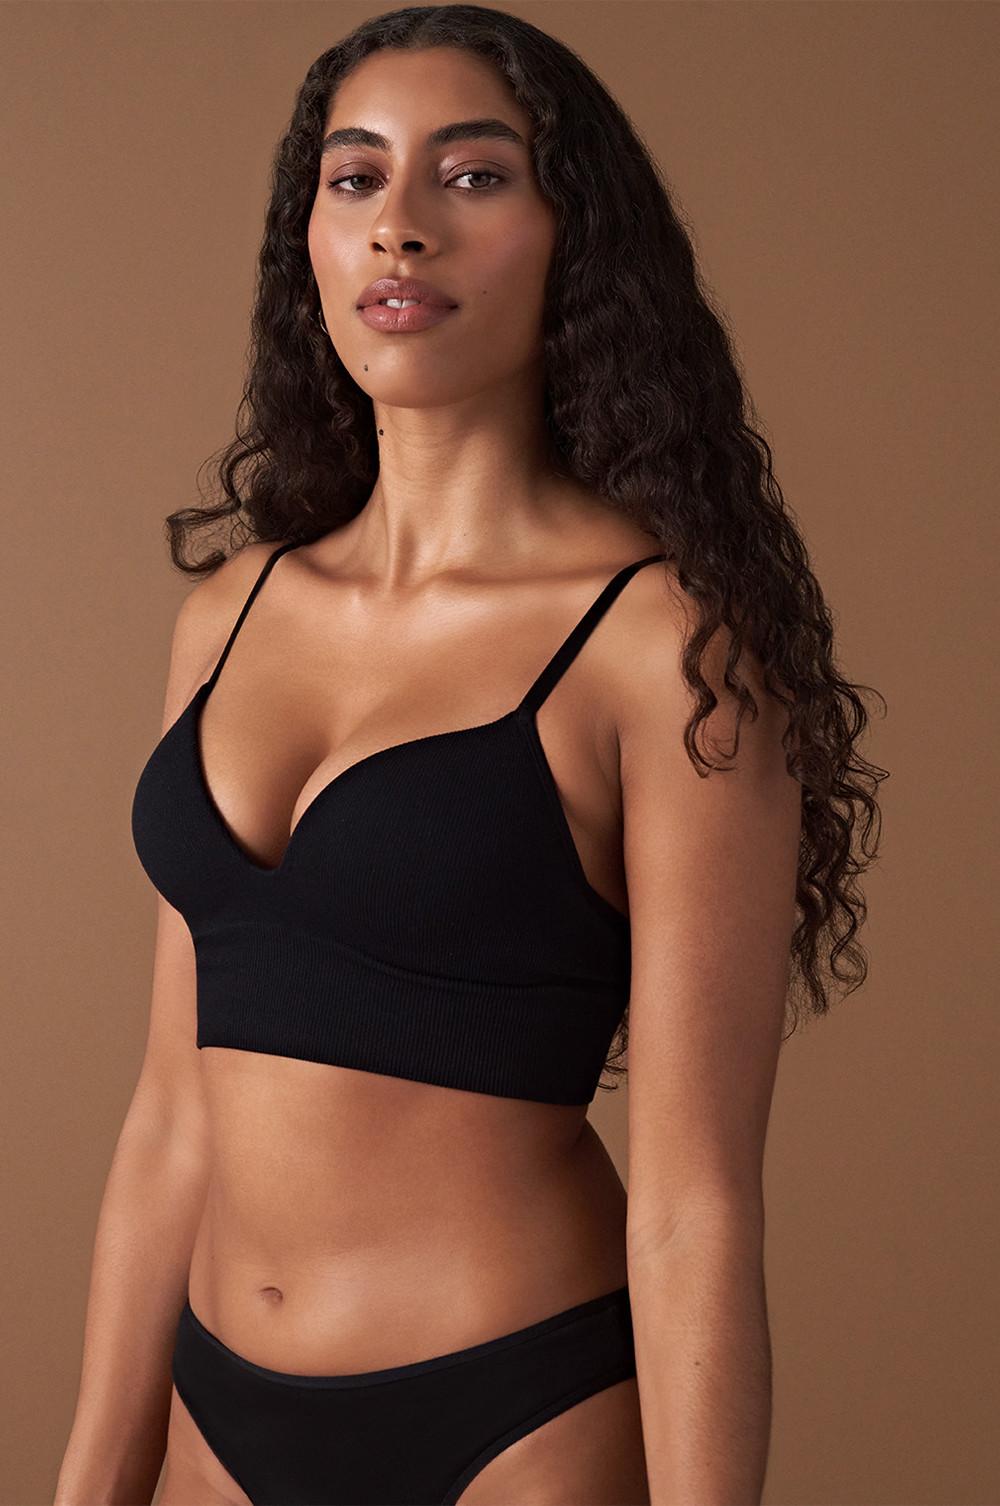 32C Bras: Bra Cup Size for 32C Boobs and Breast Size Etiquetado